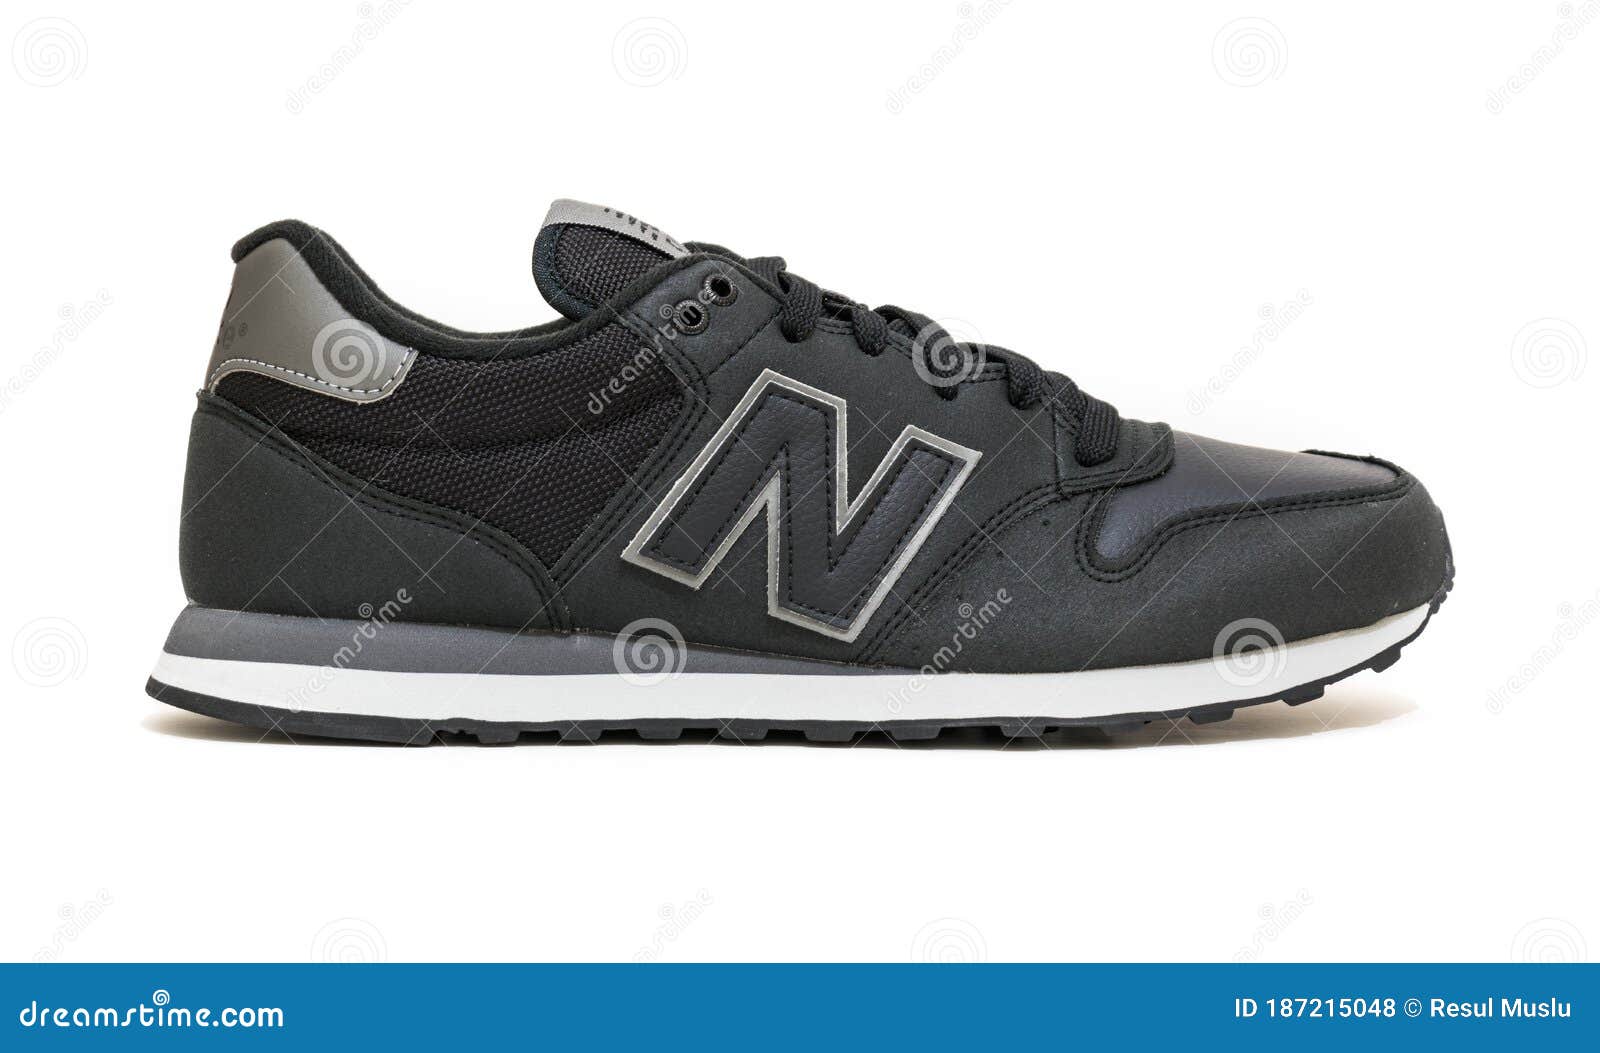 new balance black and white shoes